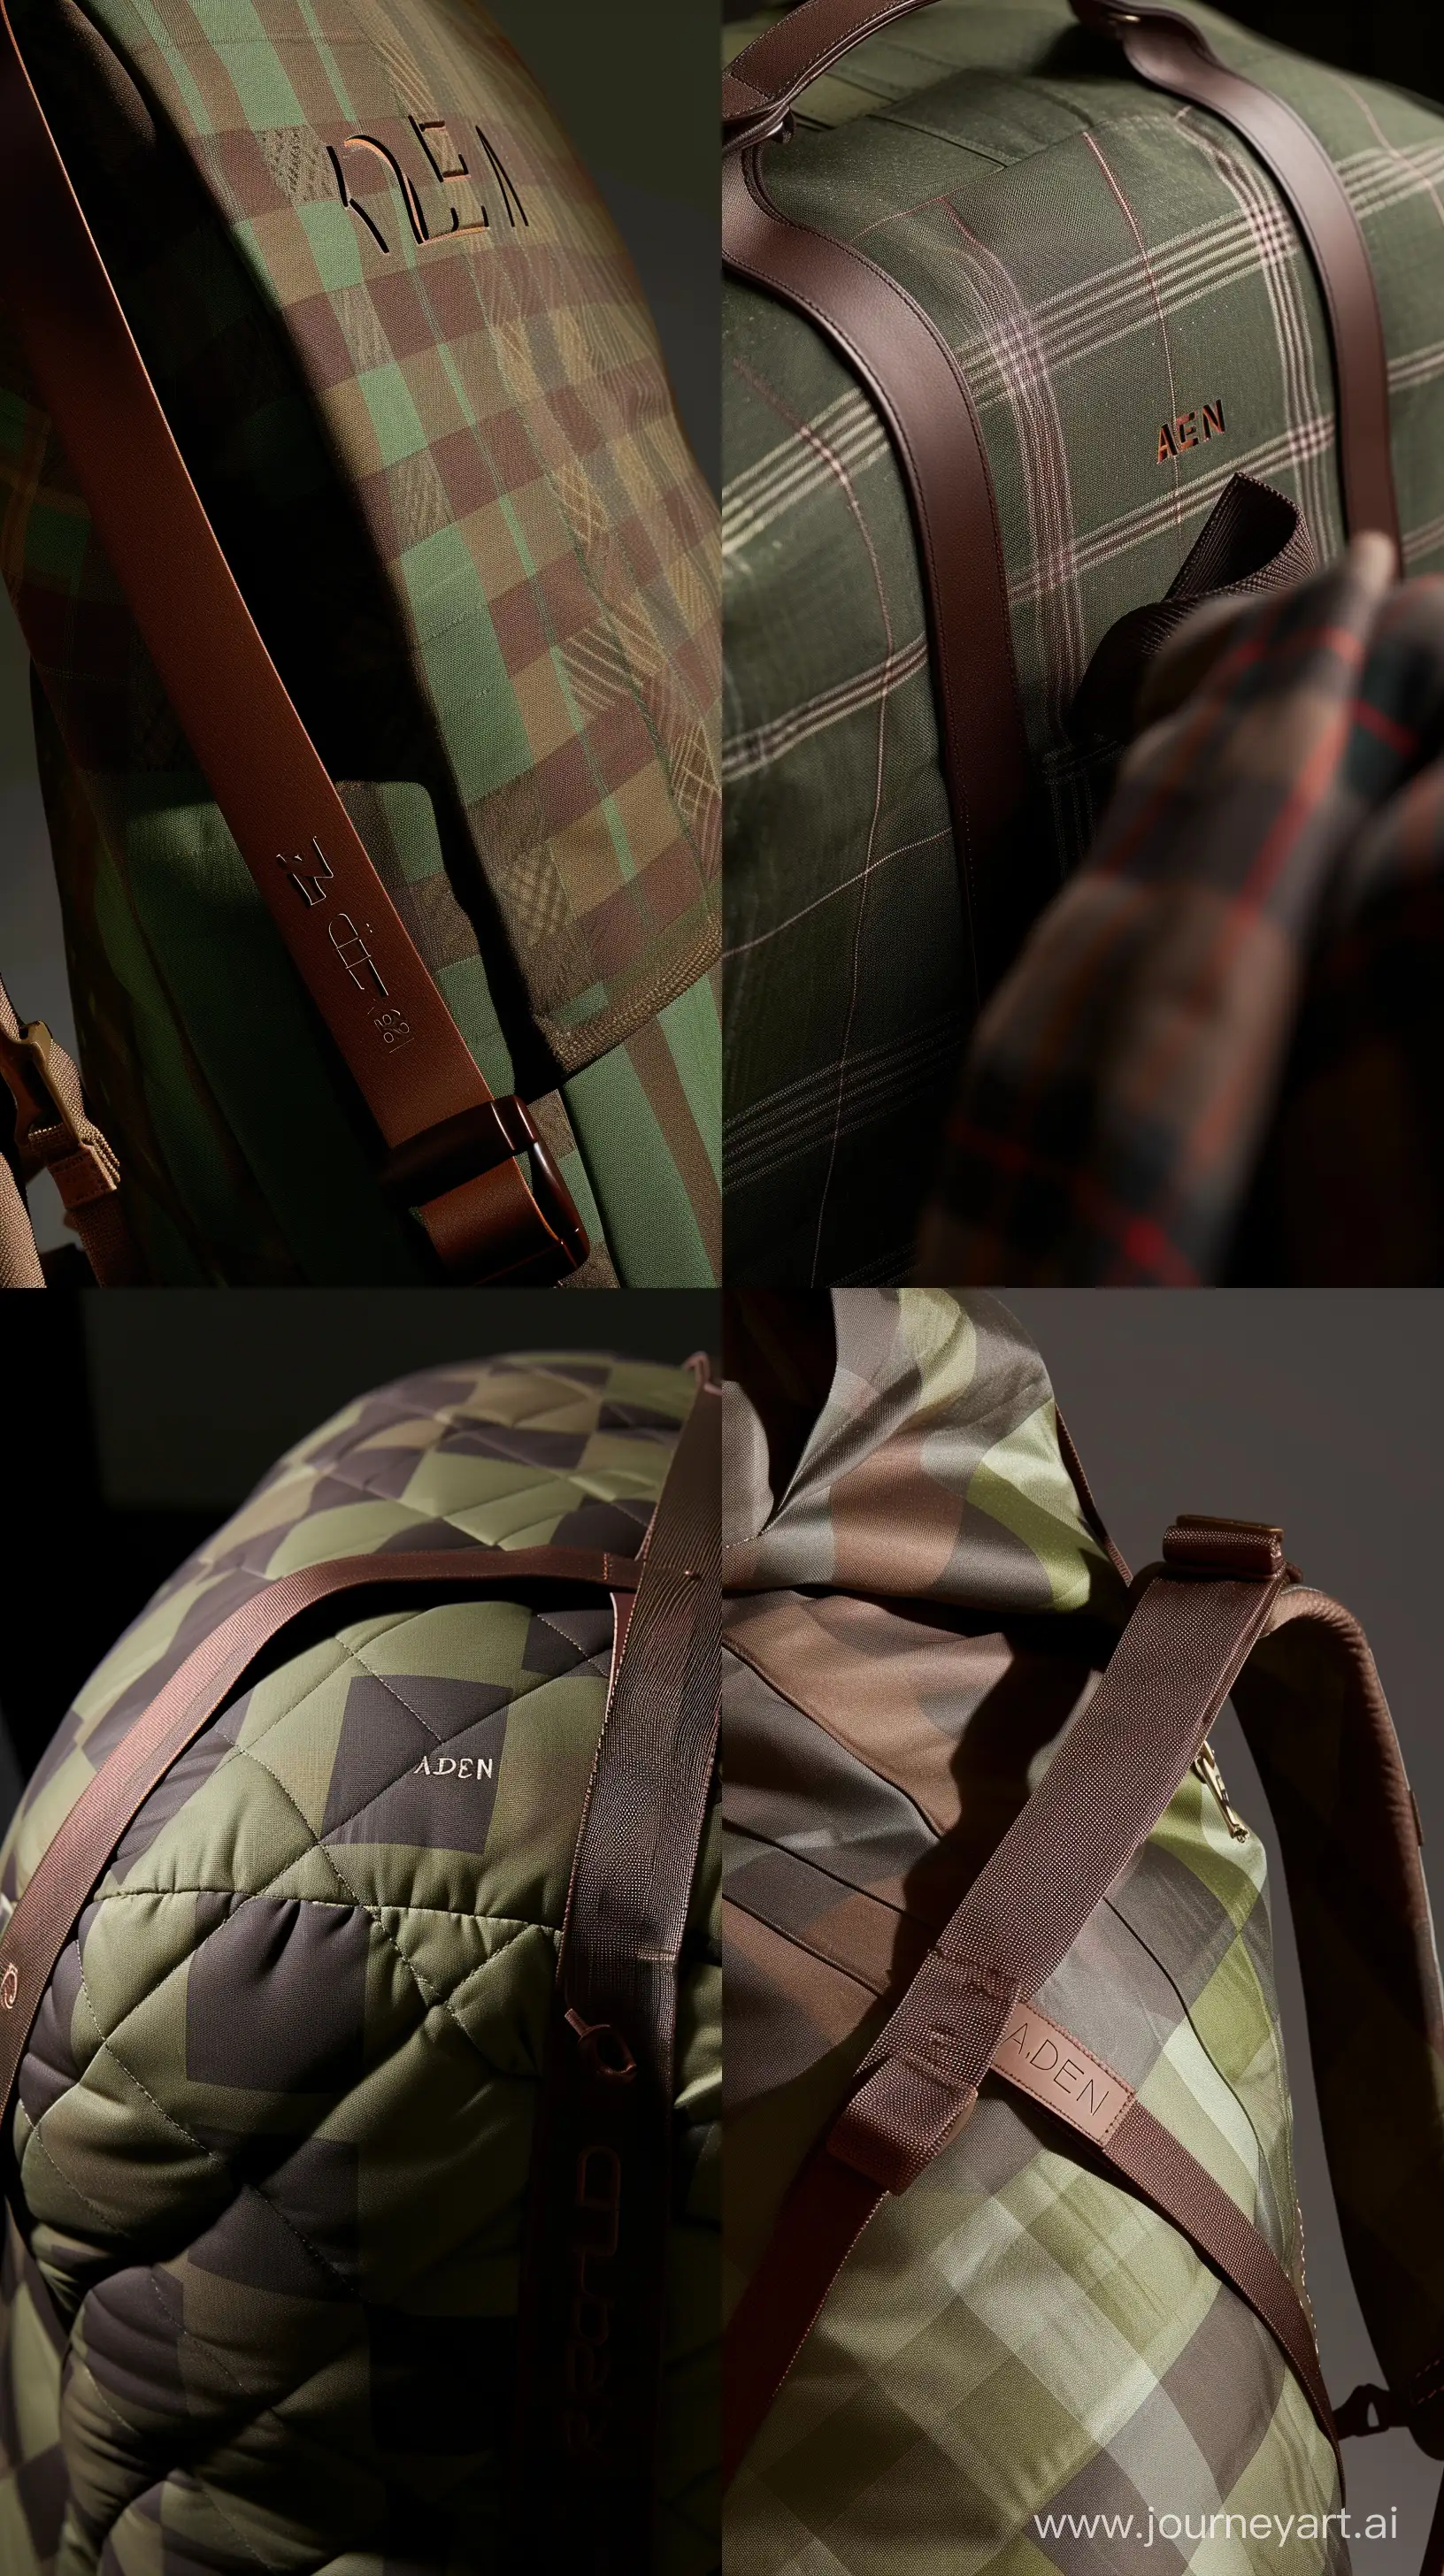 Product photography. Close-up of a The image features a large, green and brown checked backpack with a brown strap. The backpack has a unique design, with a checkered pattern on its surface. It appears to be a stylish and practical choice for carrying belongings. The backpack is positioned in the foreground of the image, with the brown strap clearly visible. With text "ADEN" It is placed at the top of the bag and engraved in it, which causes spacing and shadow --ar 9:16 --s 0 --style raw --v 6